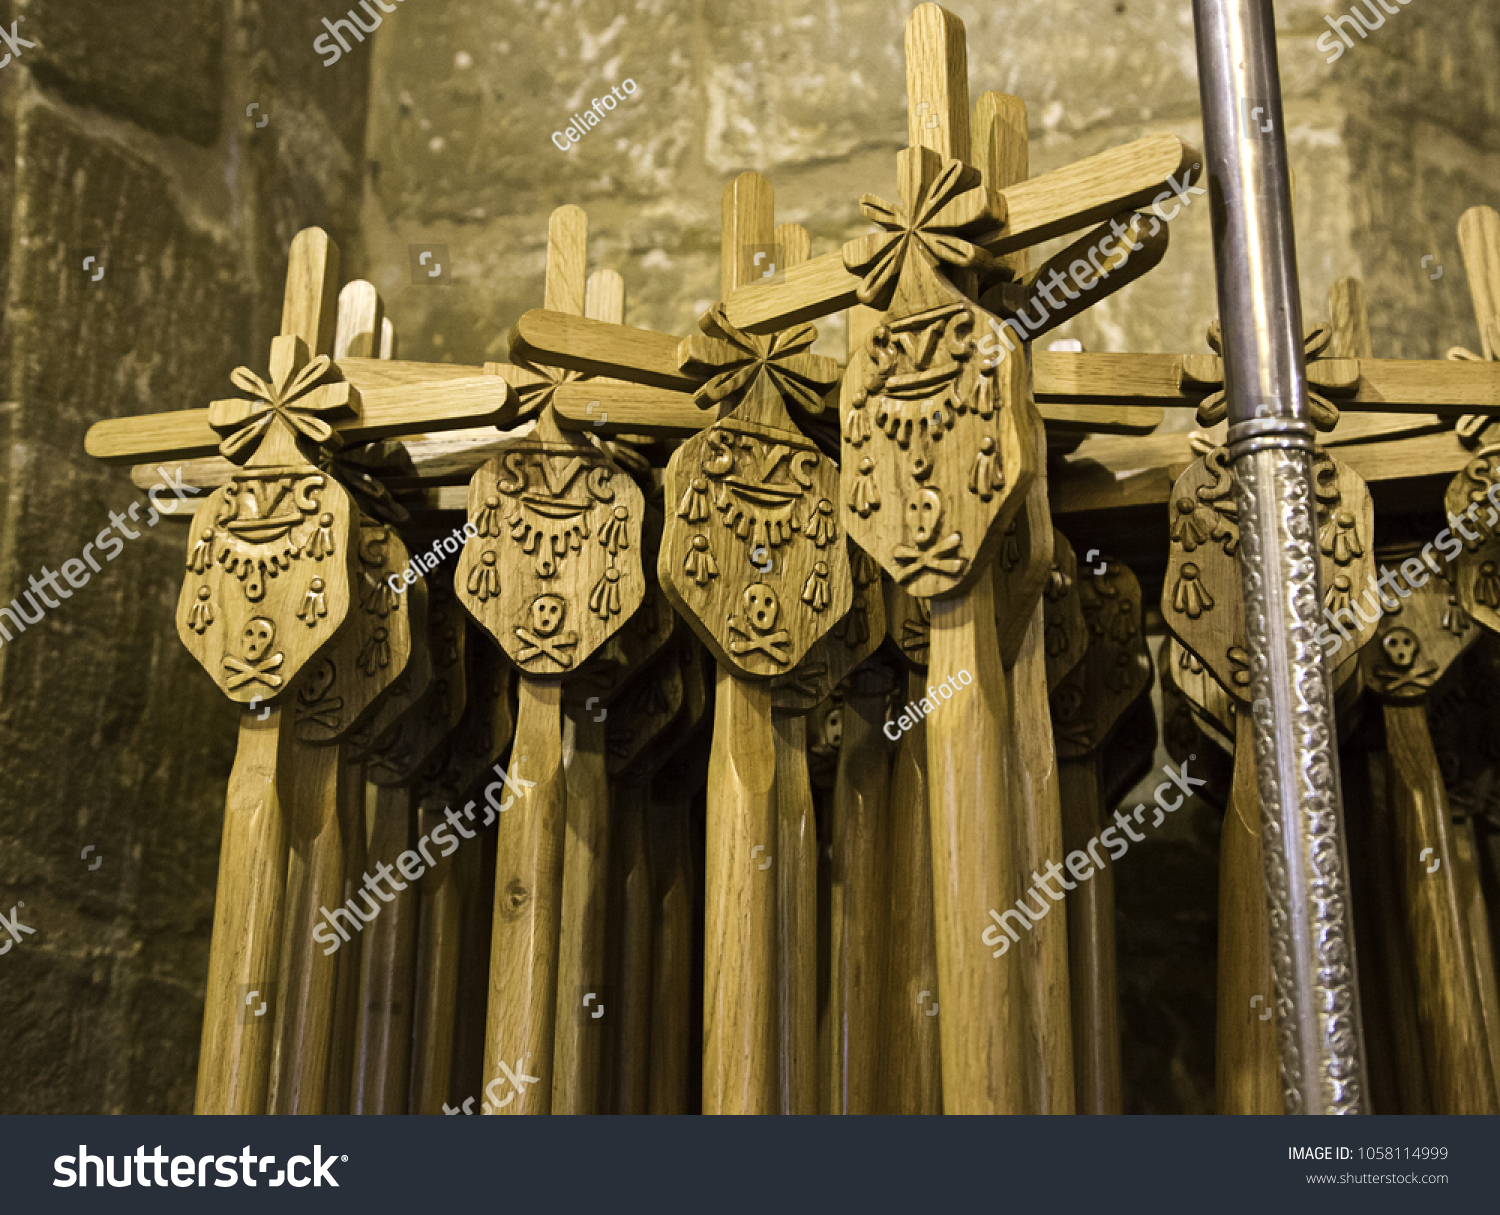 Canes of Holy Week in Holy Week, religion and faith #1058114999